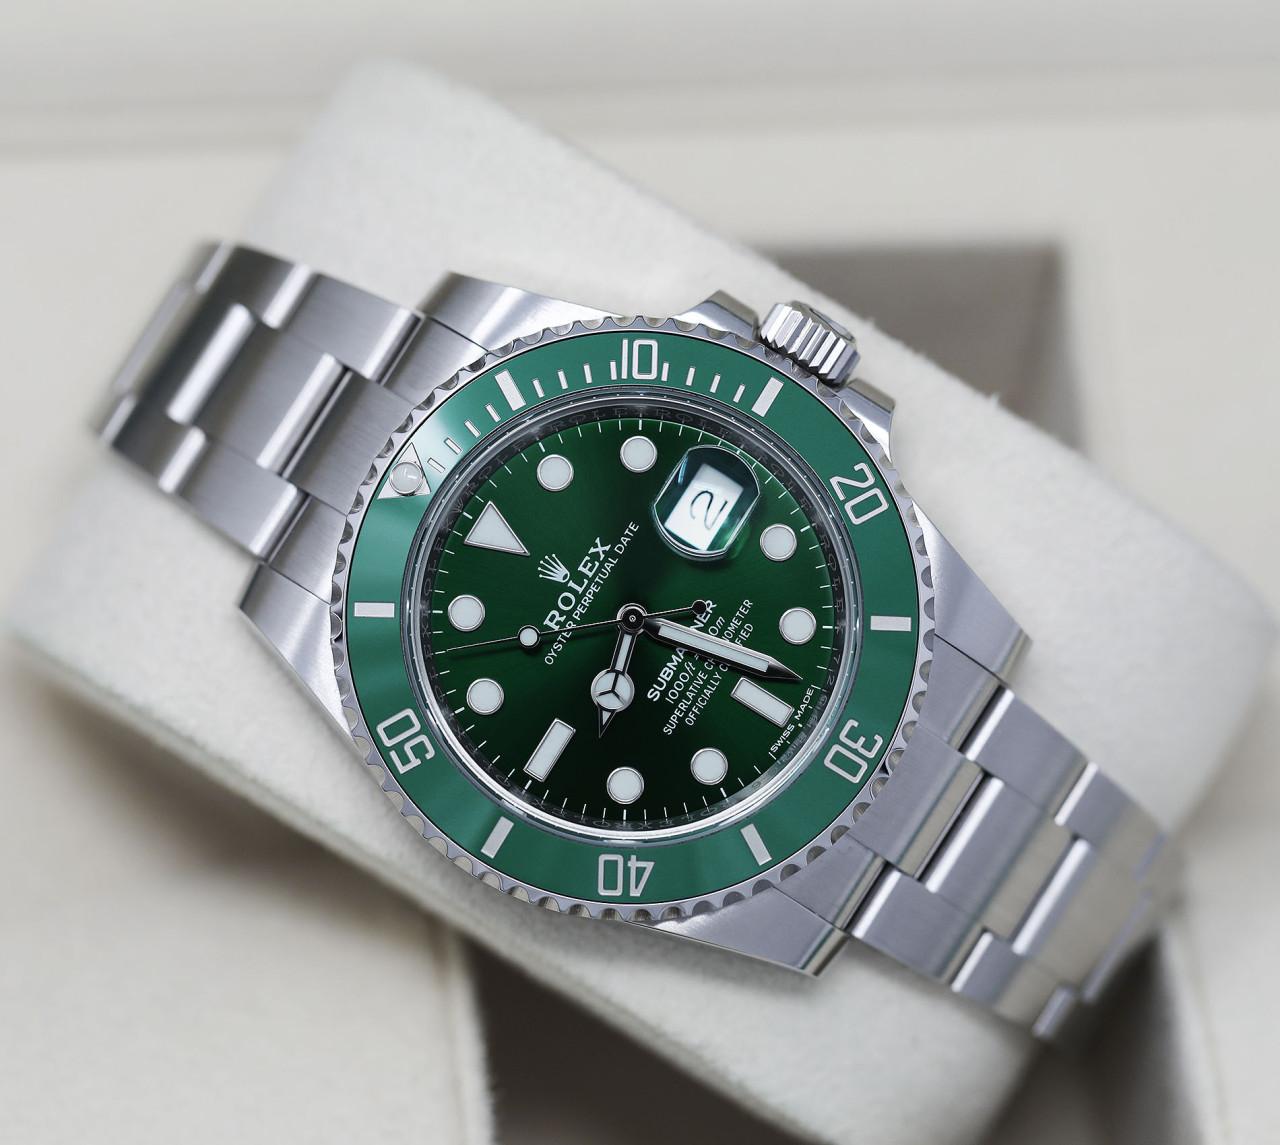 Rolex Submariner Date Stainless Steel Watch Green 'Hulk' Unworn 116610LV 

The Rolex Submariner Date 'Hulk' is designed with a 40mm stainless steel case with oyster architecture that features a green rotating ceramic bezel. The stunningly rich green